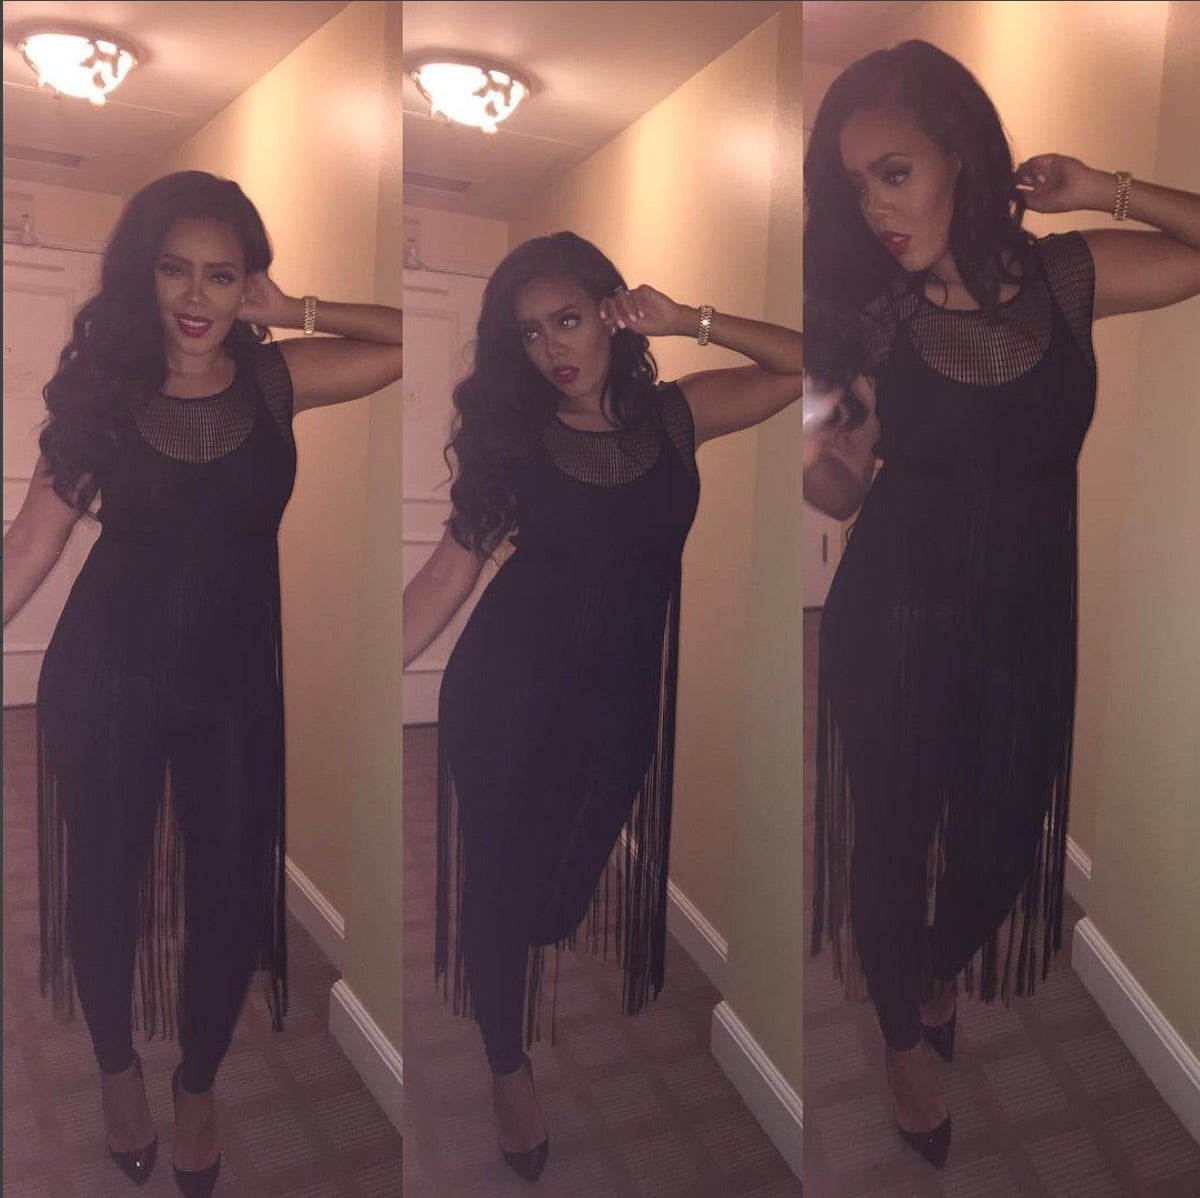 Angela Simmons’ Pregnancy Style is Totally on Point